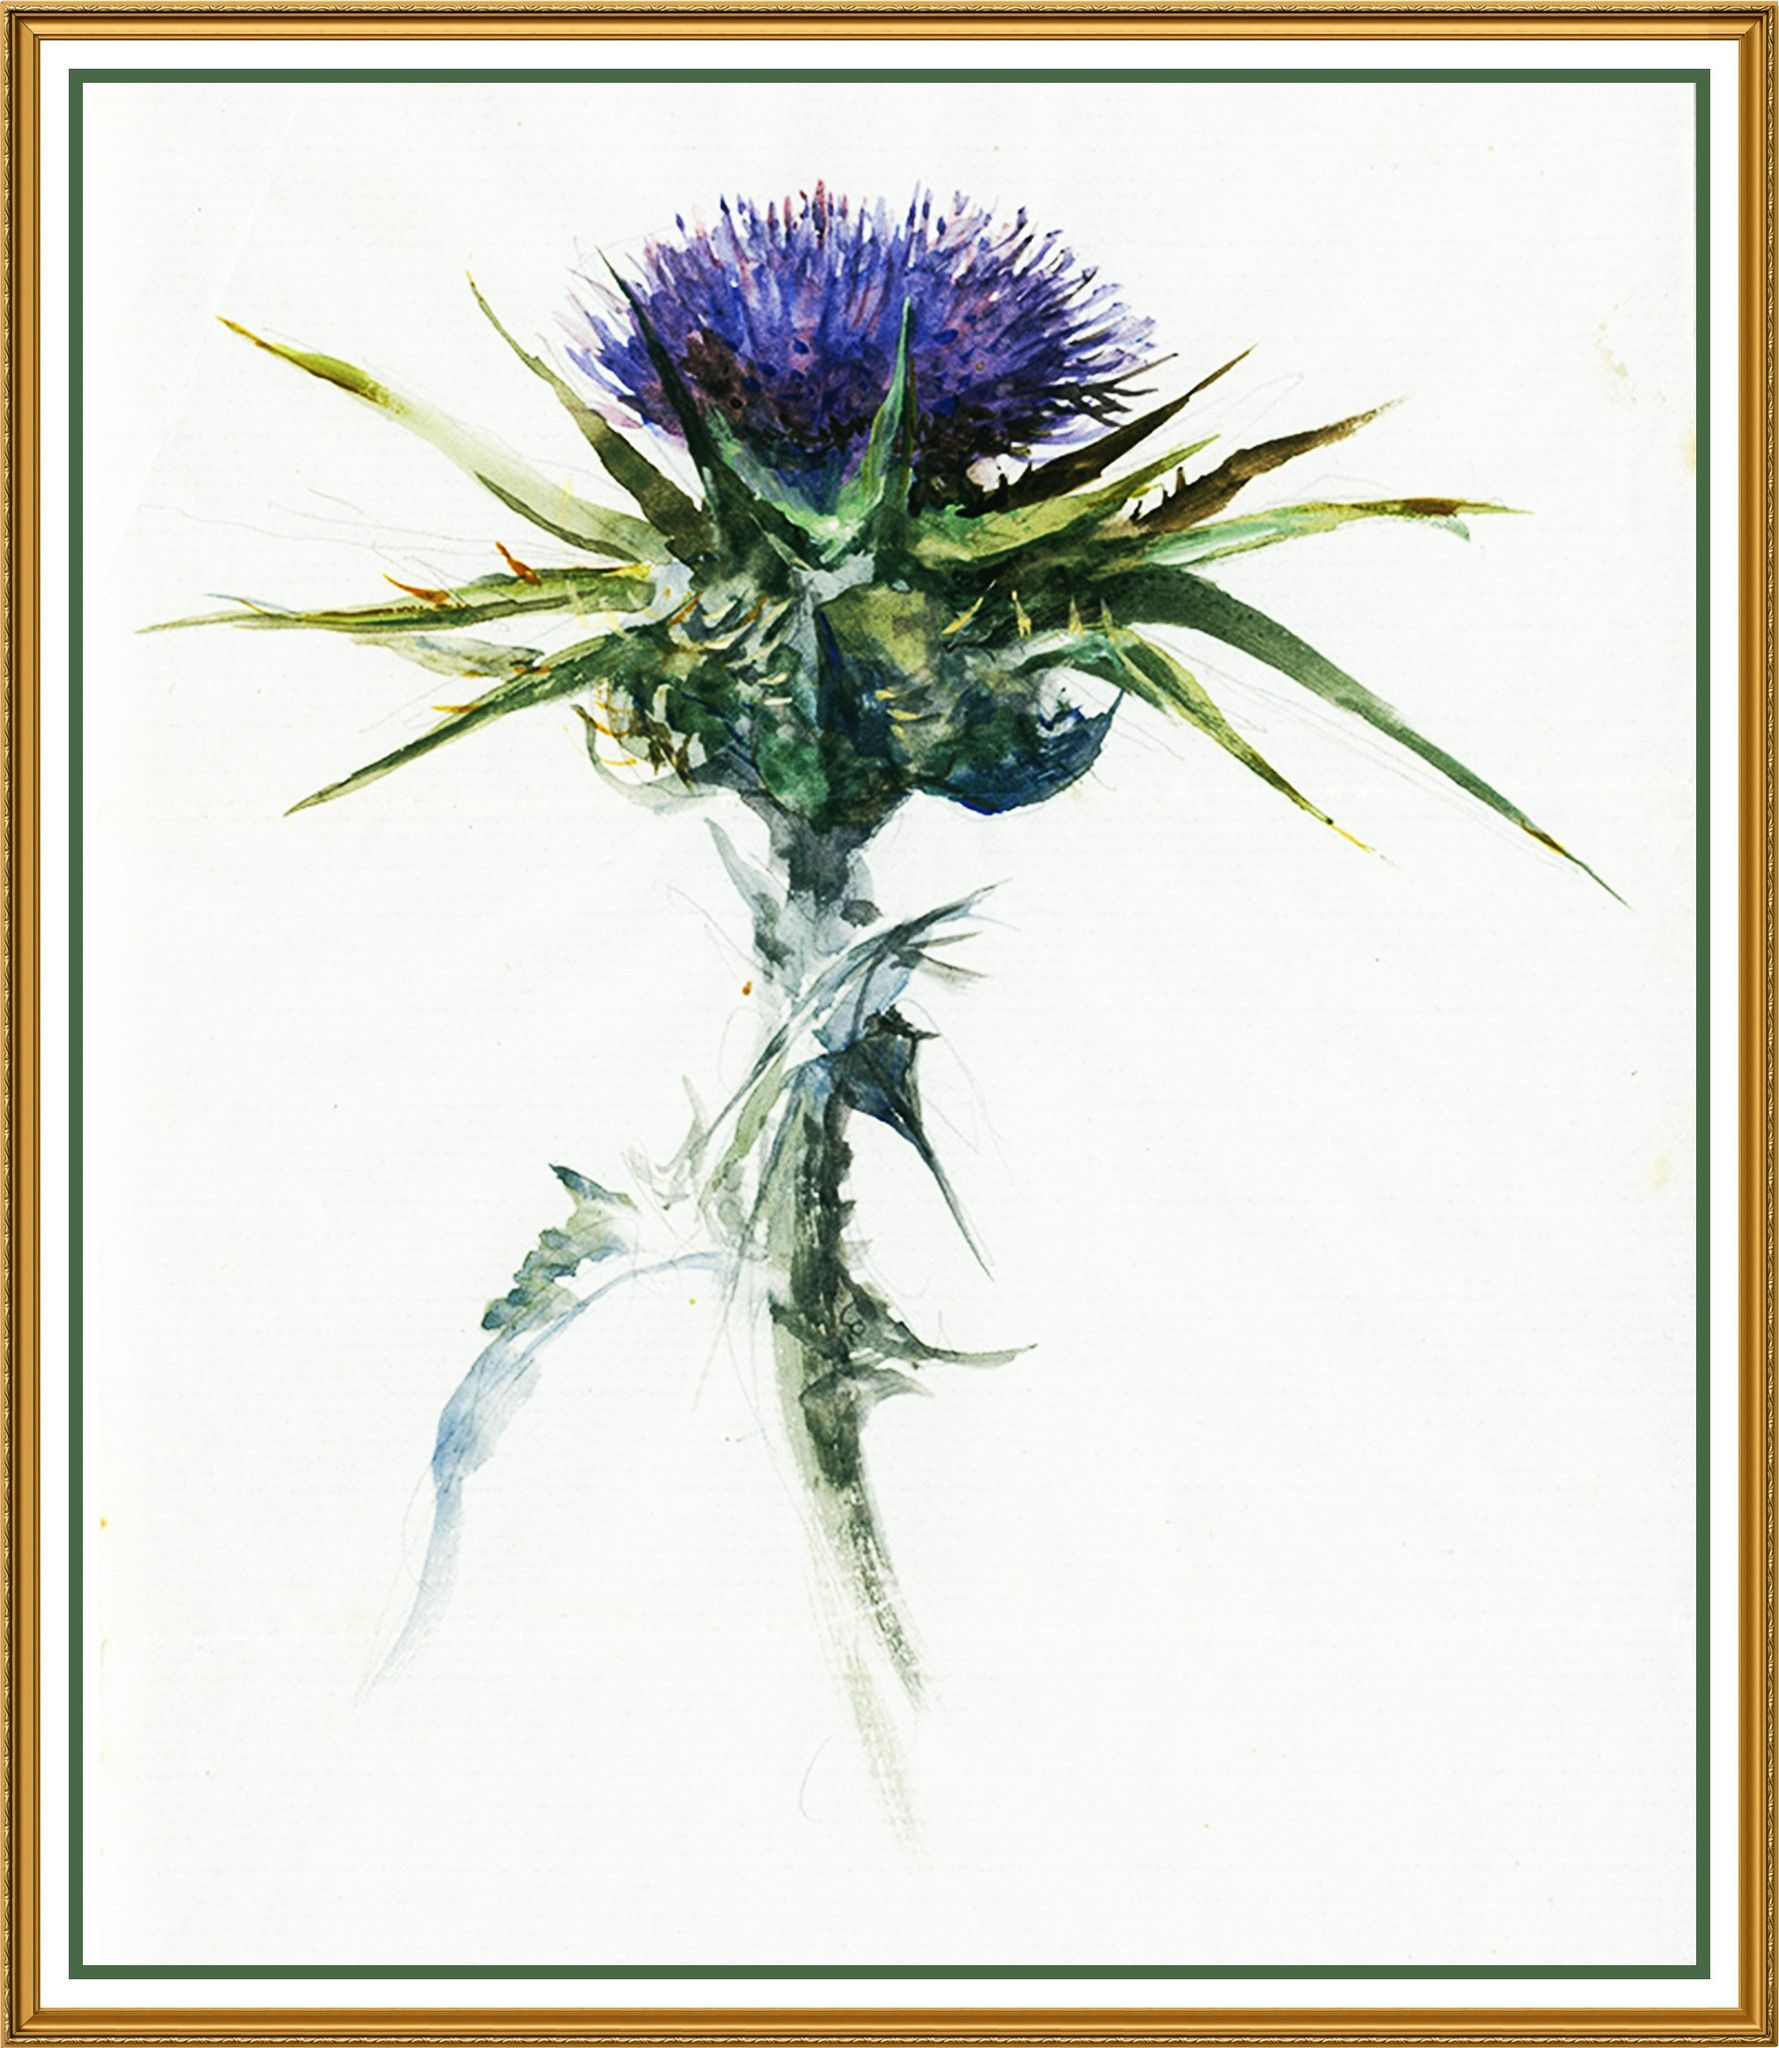 Study Of A Thistle Flower By John Ruskin Counted Cross Stitch Or intended for John Ruskin Botanical Drawings - Botanical Gallery Calendargraphicdesign.com